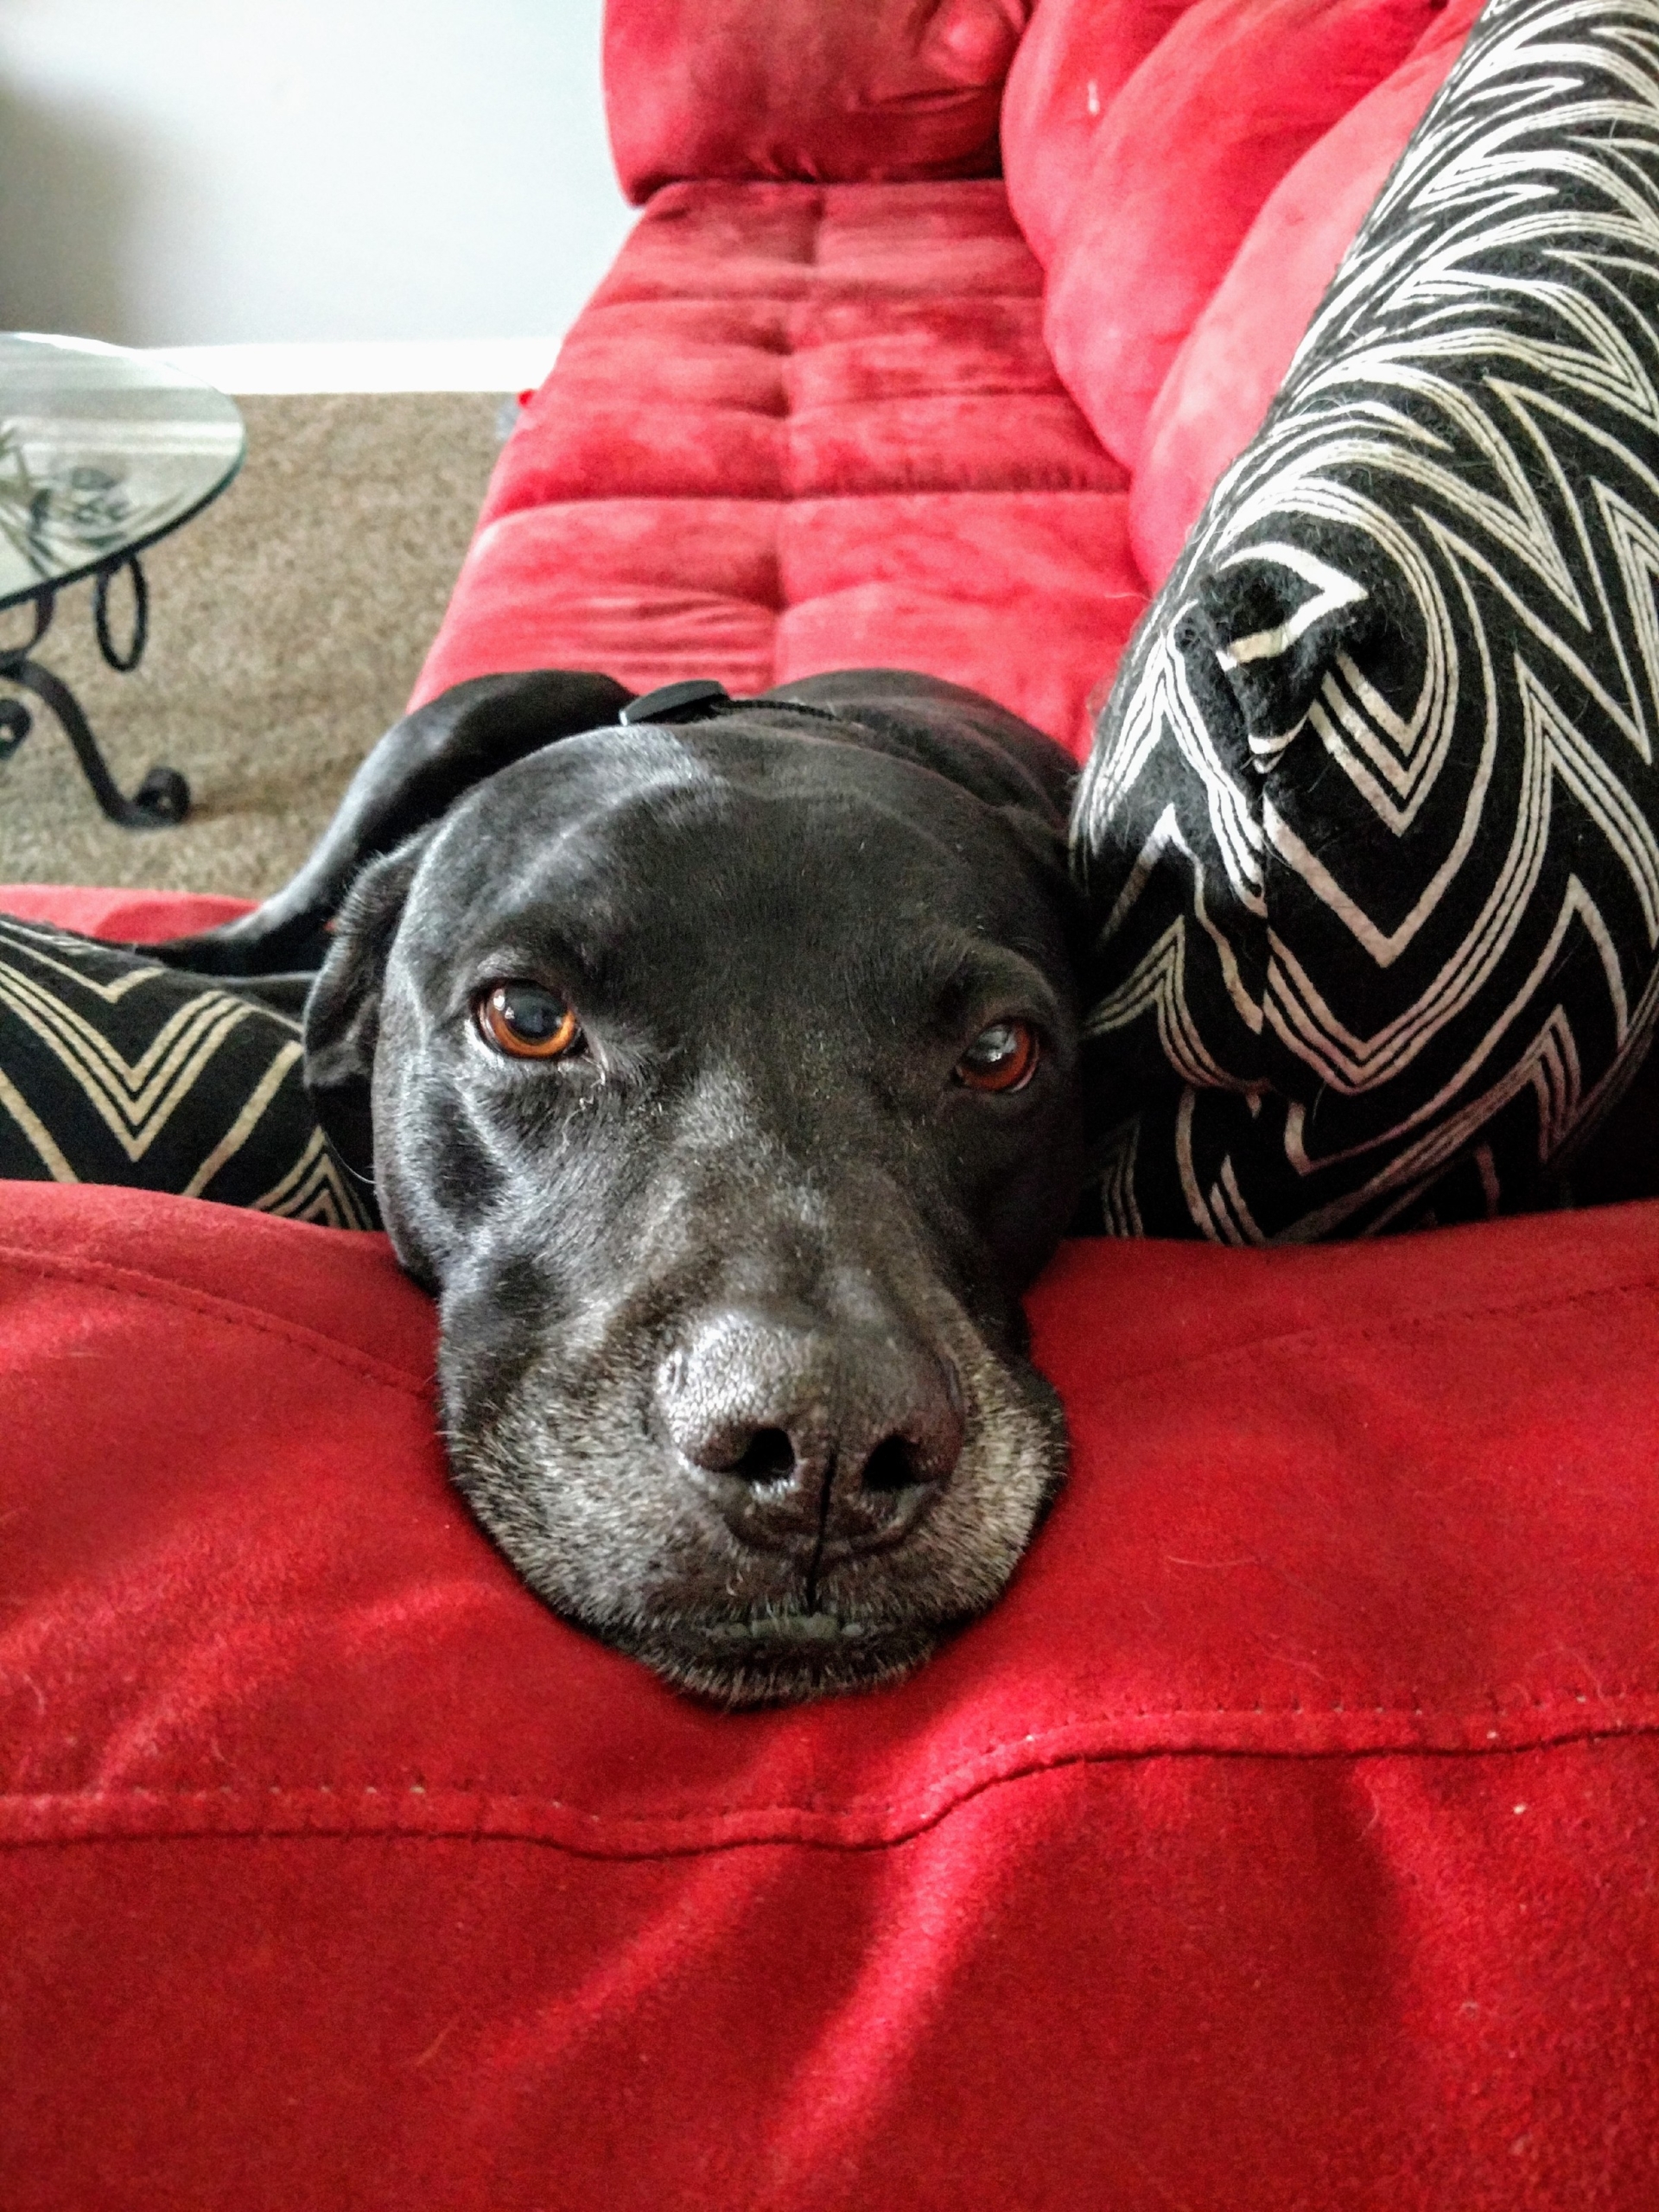 Famous Shamus, a black lab/pit/Dane mix with some gray on his snout, lies his head down on the arm of a red couch, next to some 